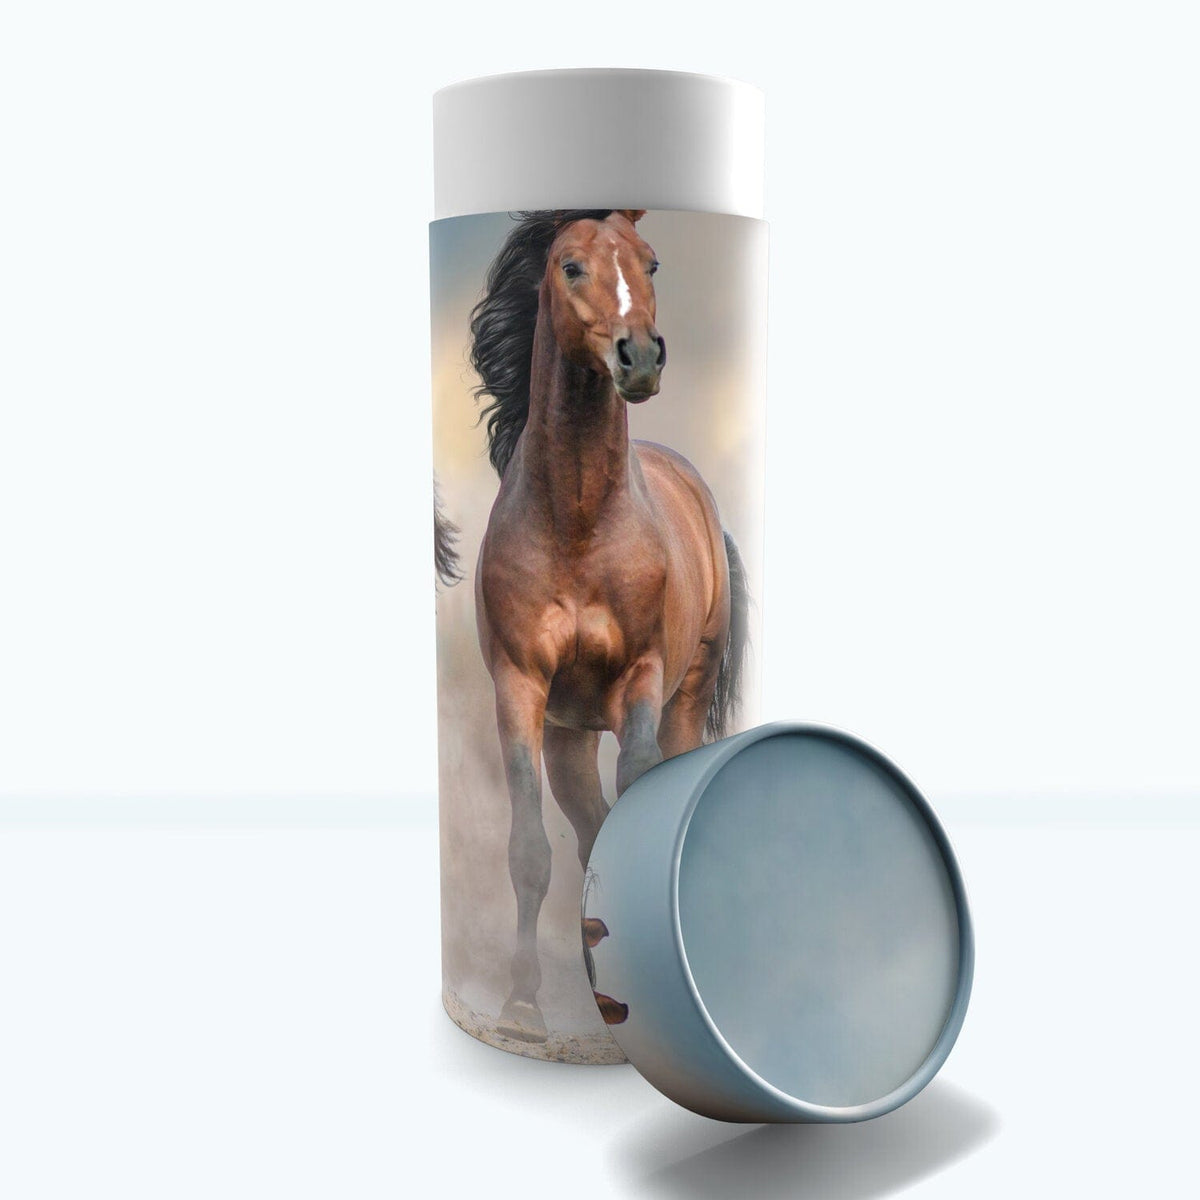 Commemorative Cremation Urns Small Wild Horses Biodegradable &amp; Eco Friendly Burial or Scattering Urn / Tube